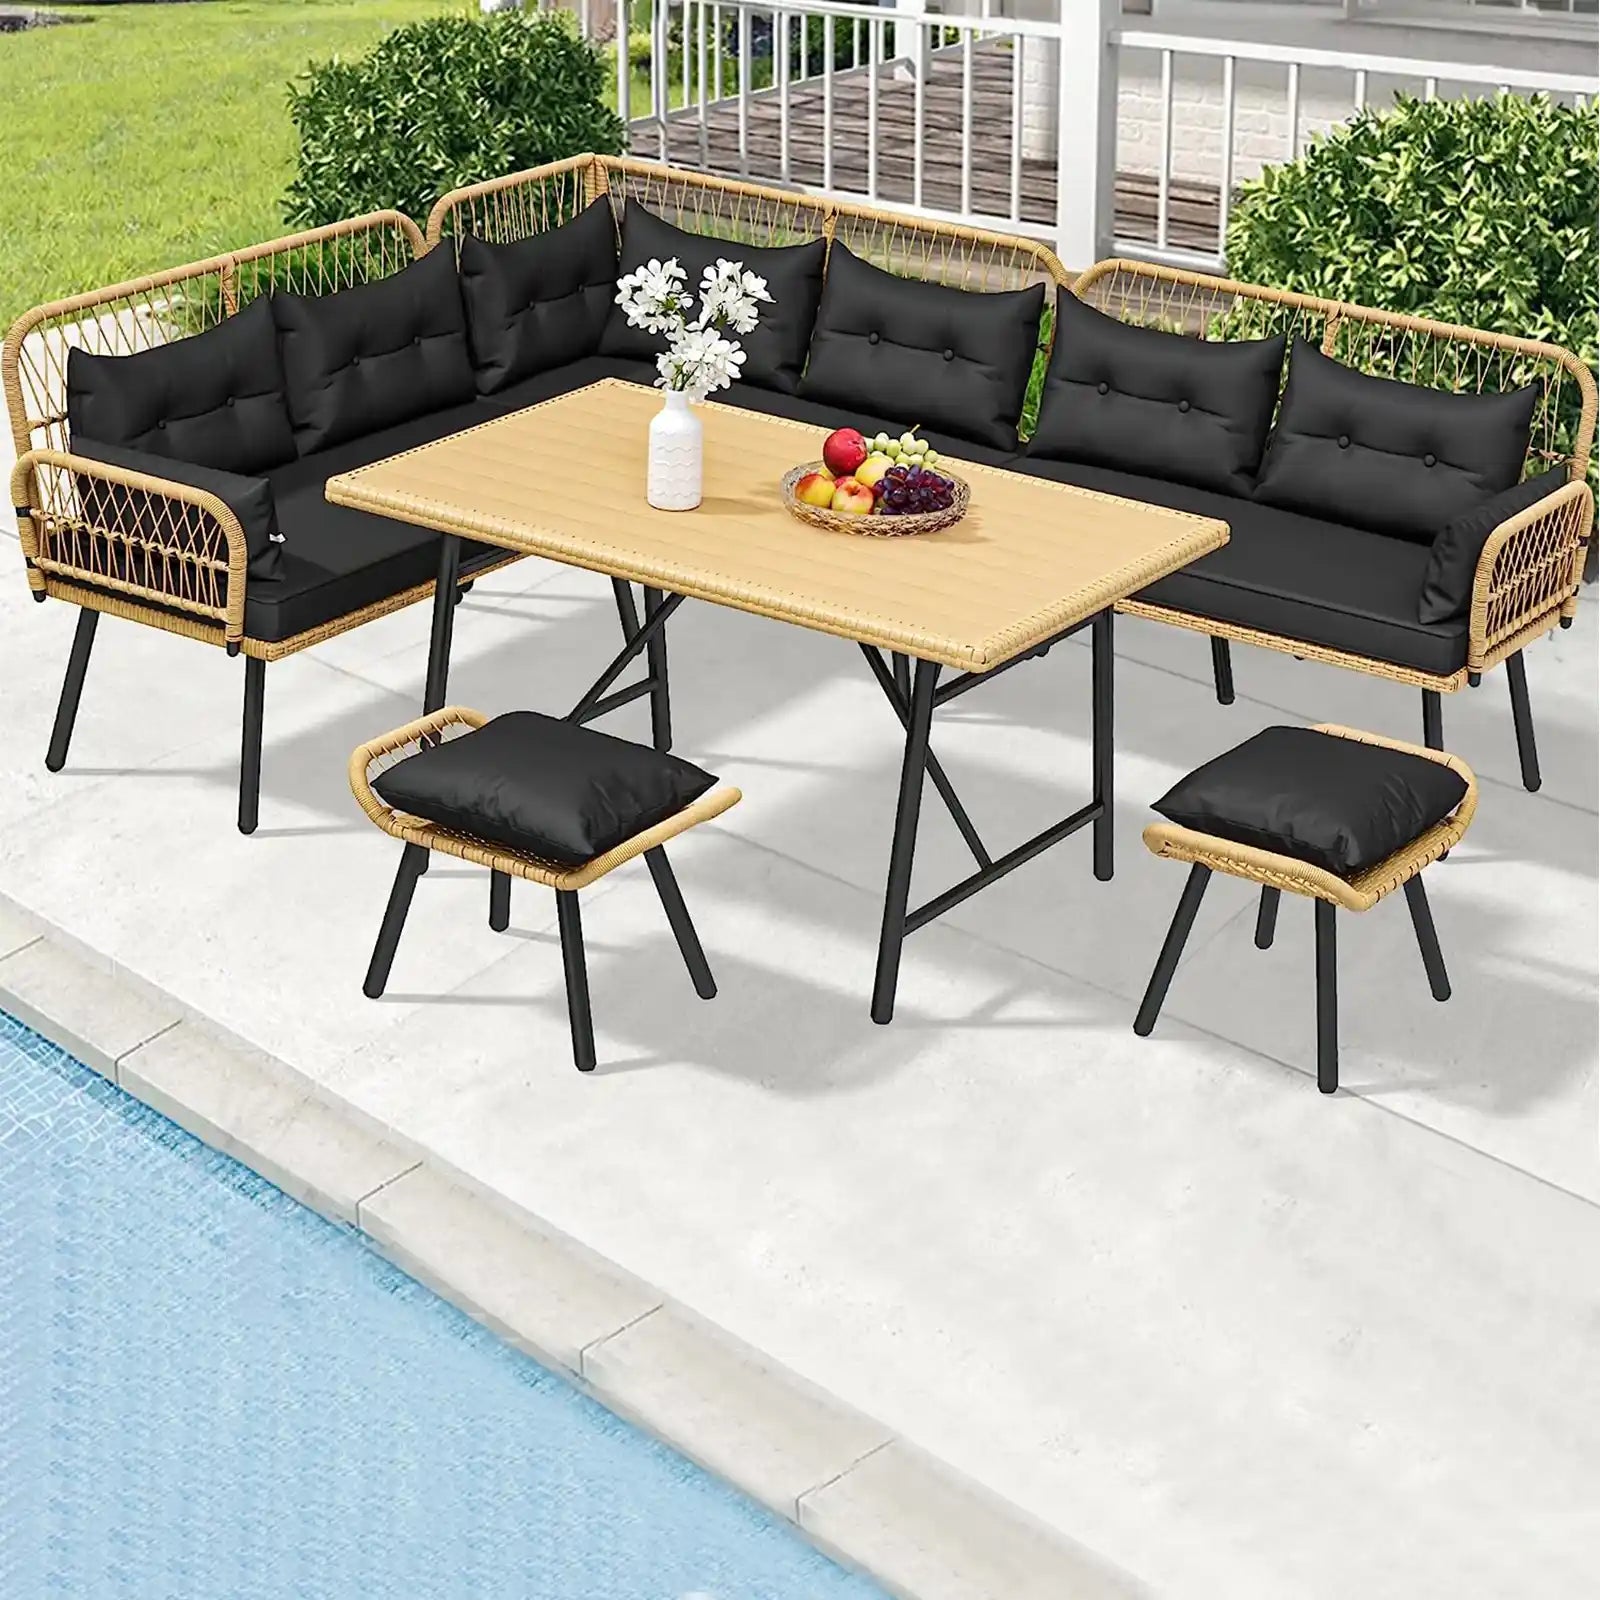 9-Person Patio Furniture Set with L-Shaped Lounger and Low Stools